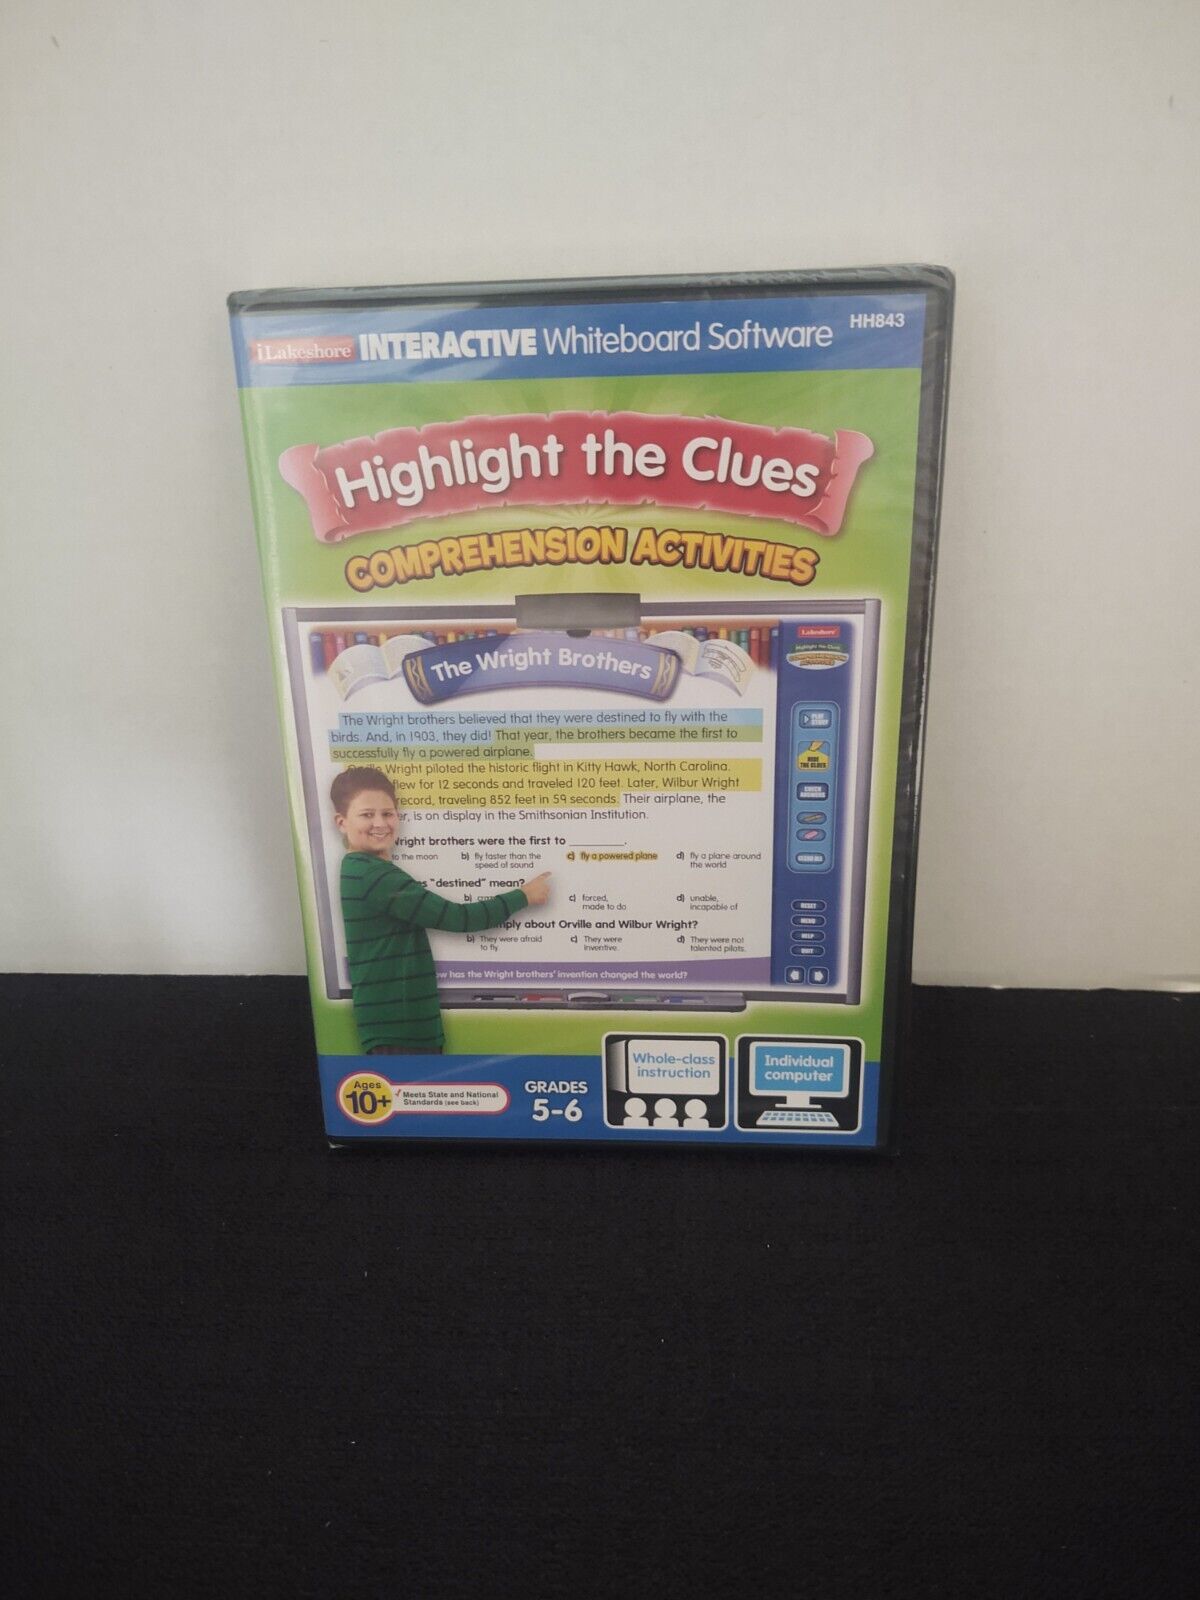 Highlight The Clues: Comprehension Activities For Grades 5-6 (CD-ROM Software)